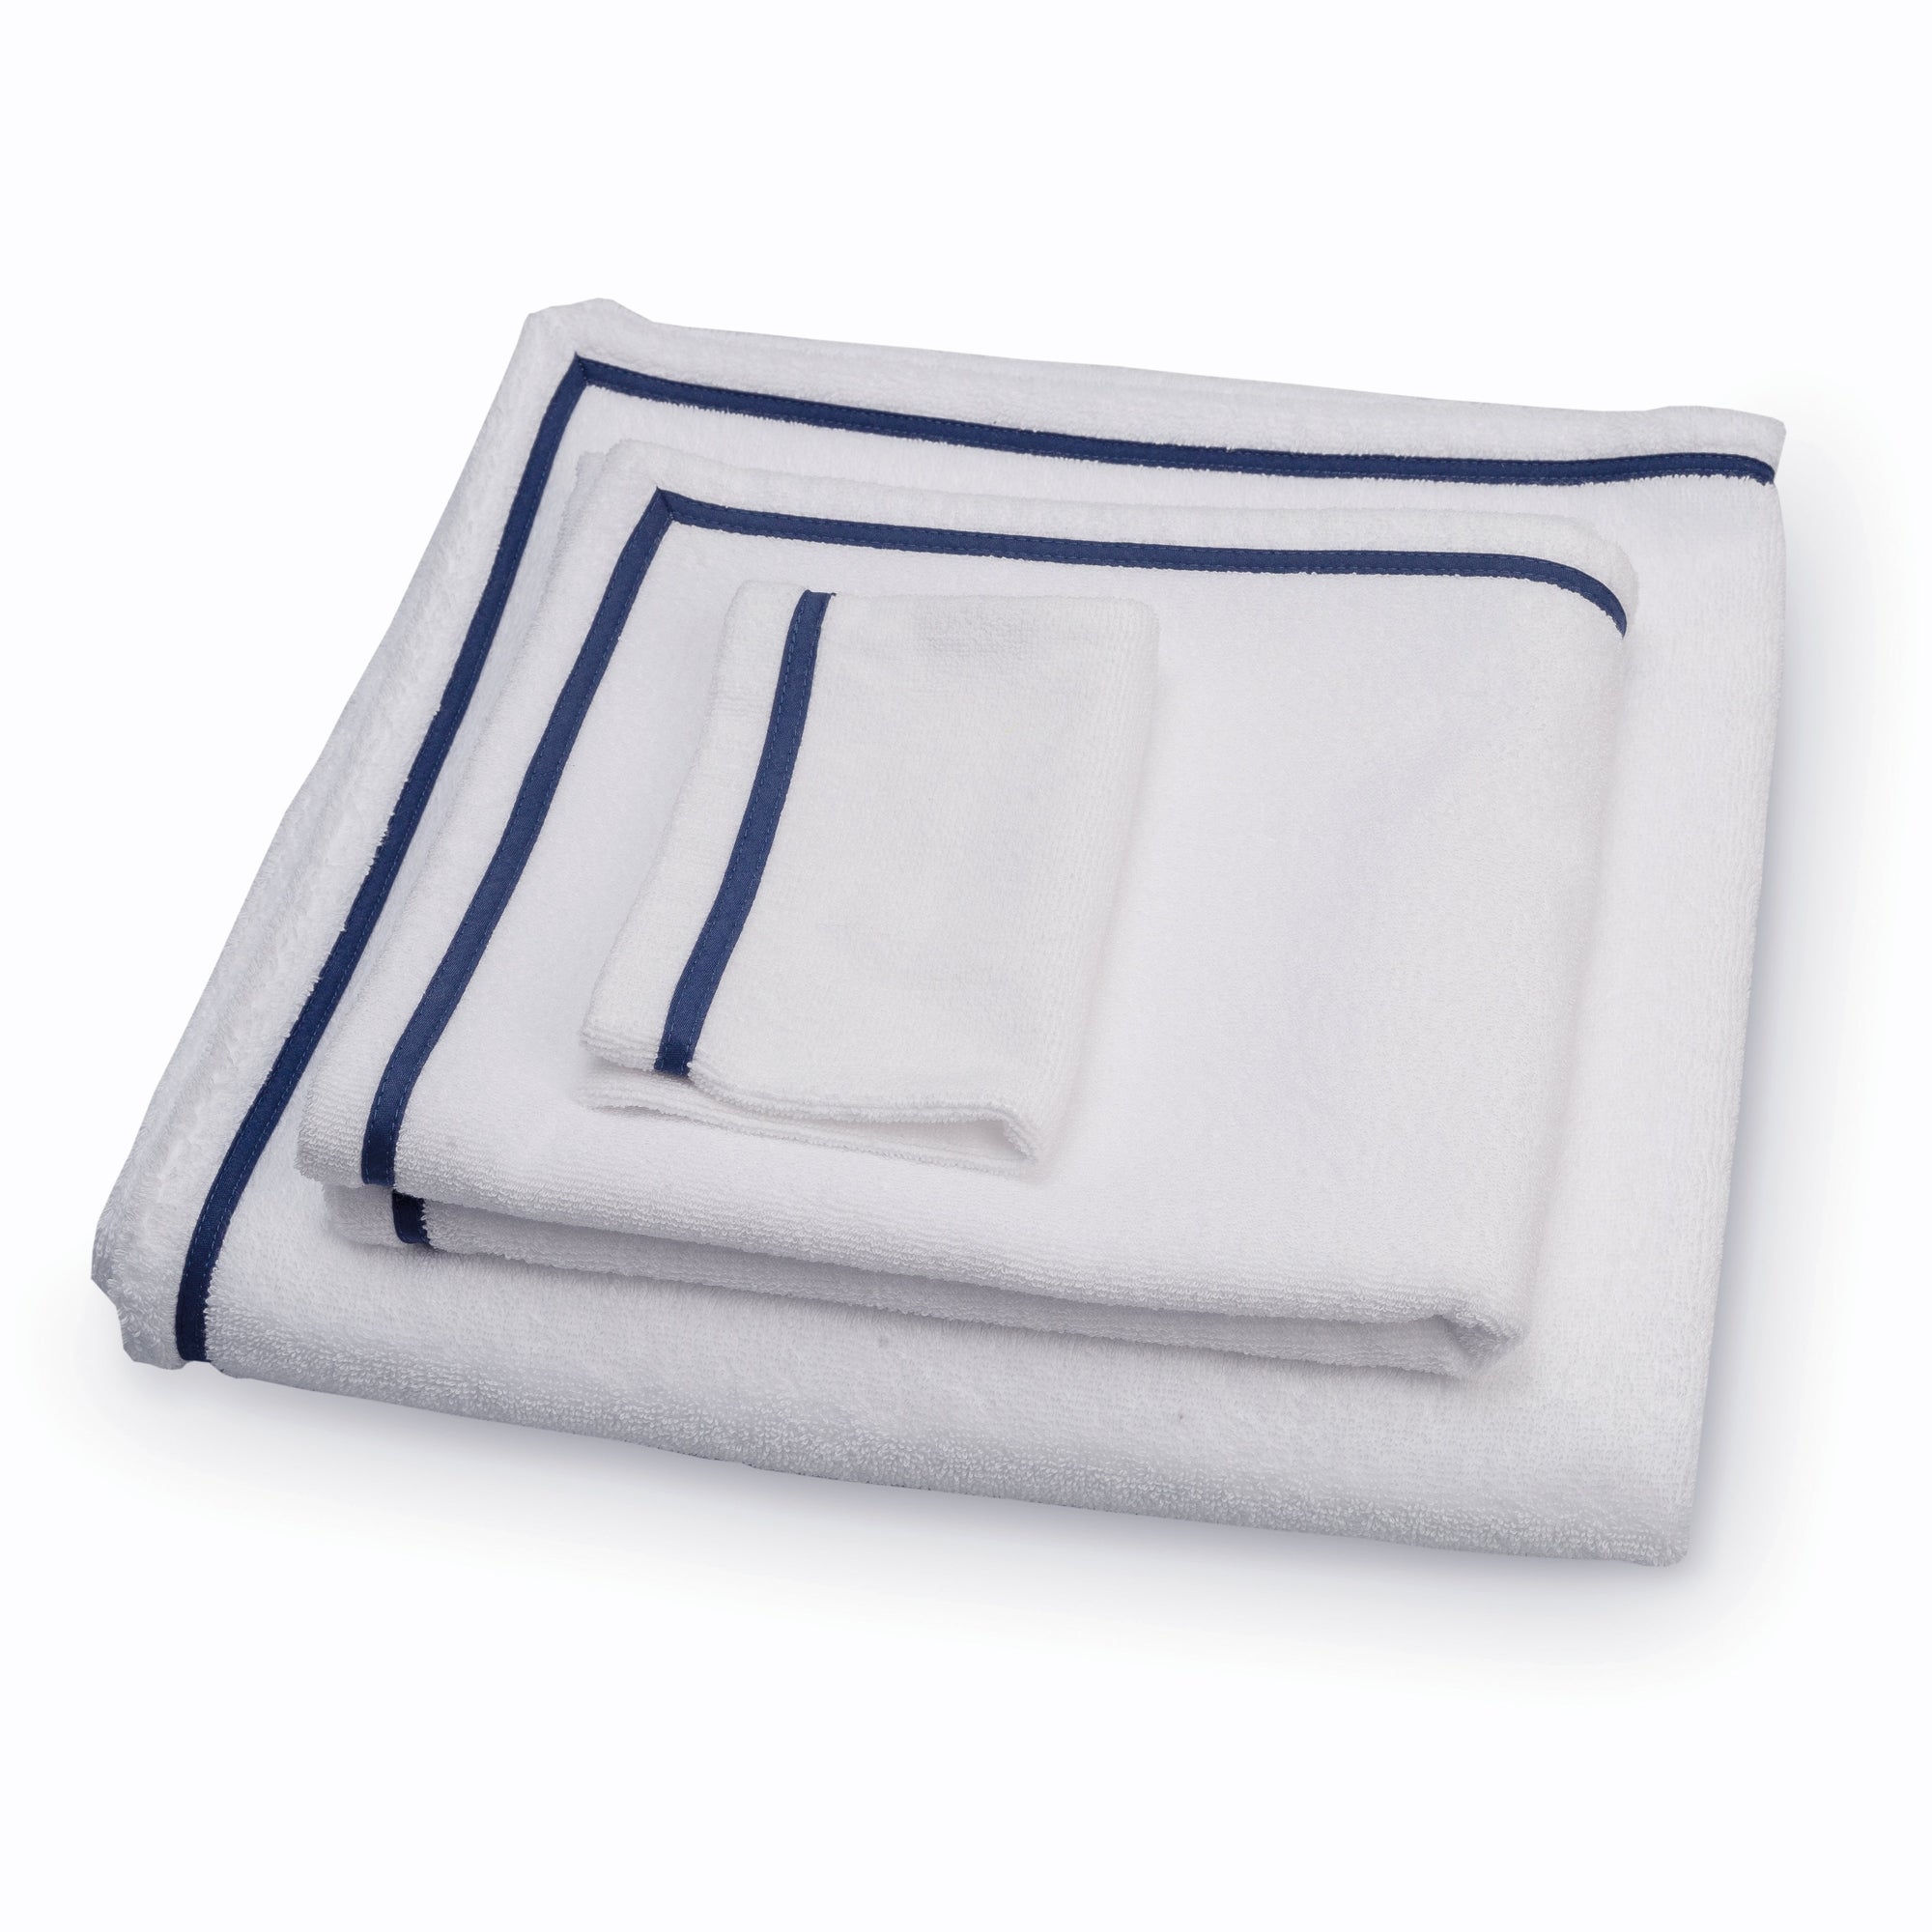 Saxo Cadette Blue Bath Towels by Abyss & Habidecor | Fig Linens and Home